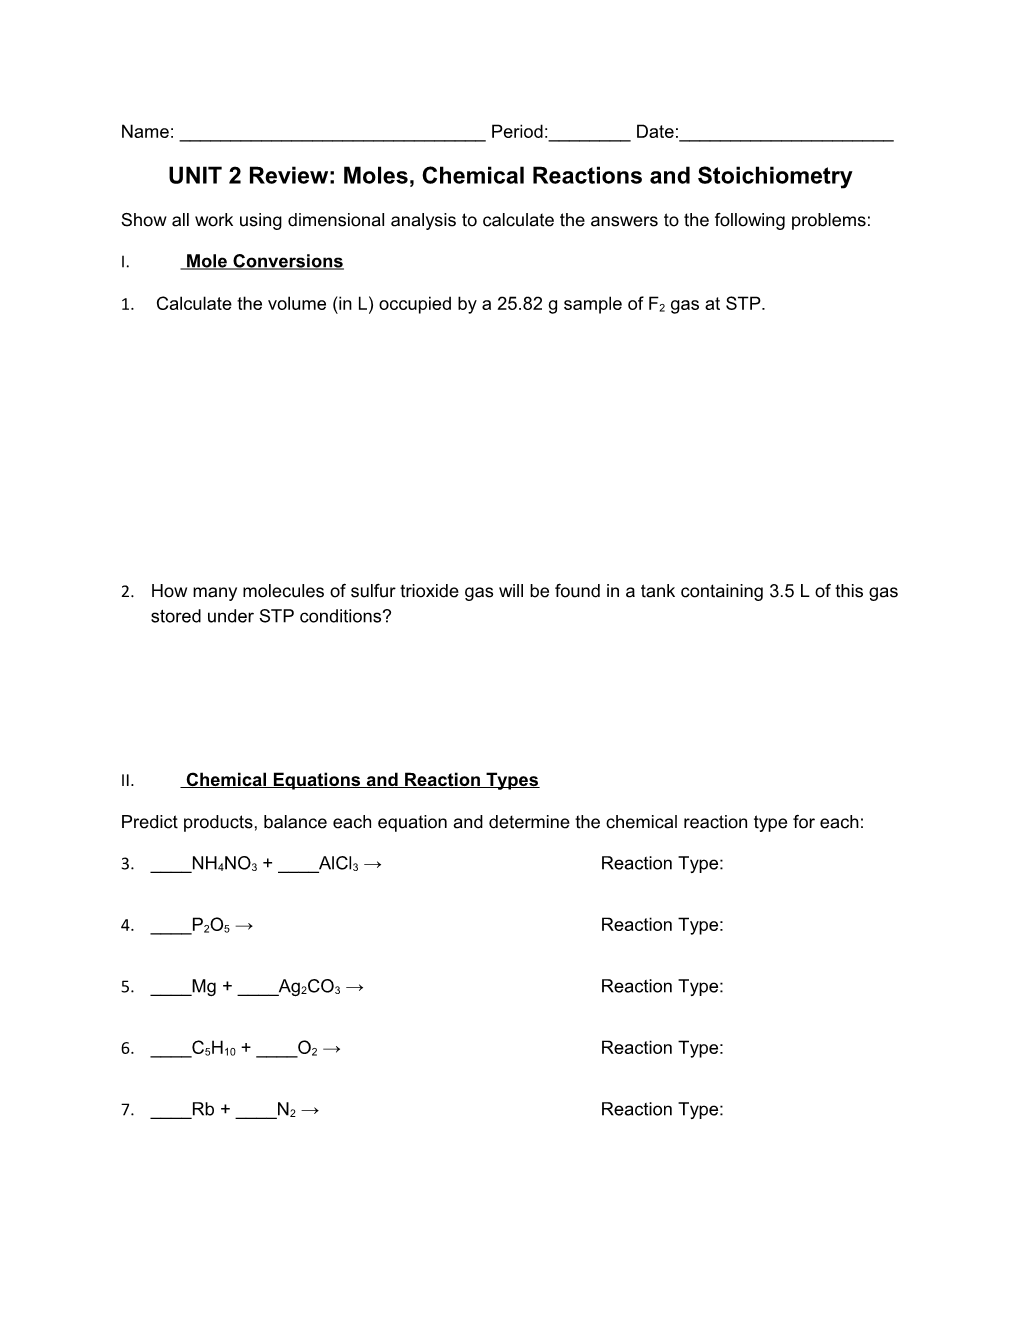 UNIT 2 Review: Moles, Chemical Reactions and Stoichiometry